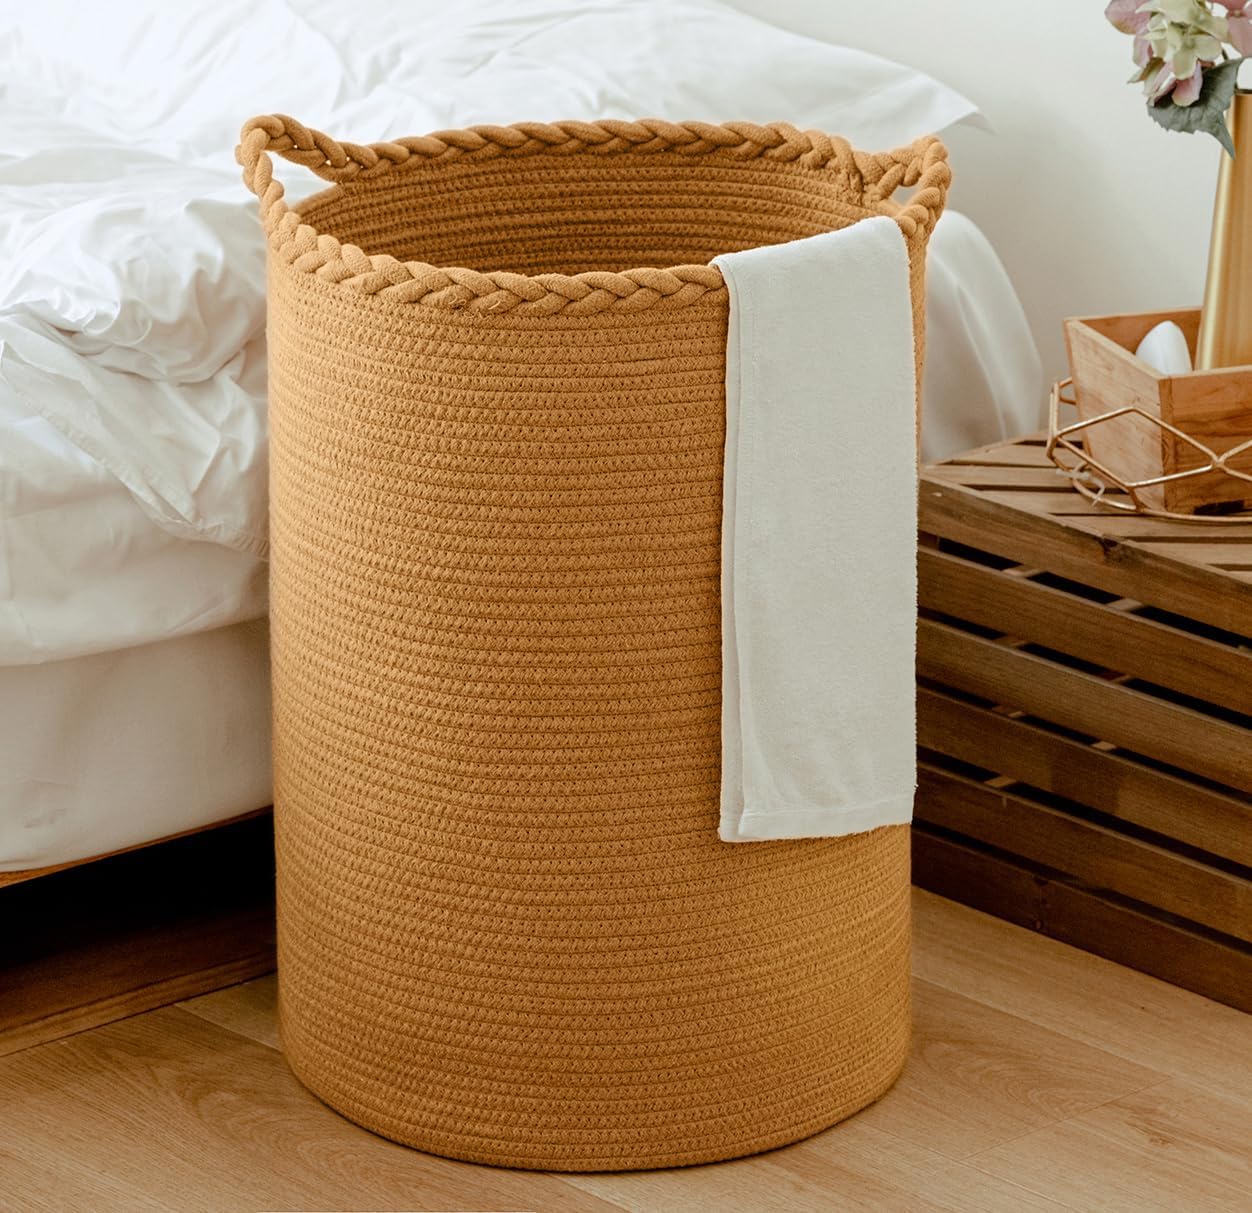 58L Cotton Woven Laundry Hamper,Foldable Laundry Basket for Blankets,Pillows,Toys,Shoes Tall CLothes Hamper Laundry Bin Light Brown 20''H 15''D